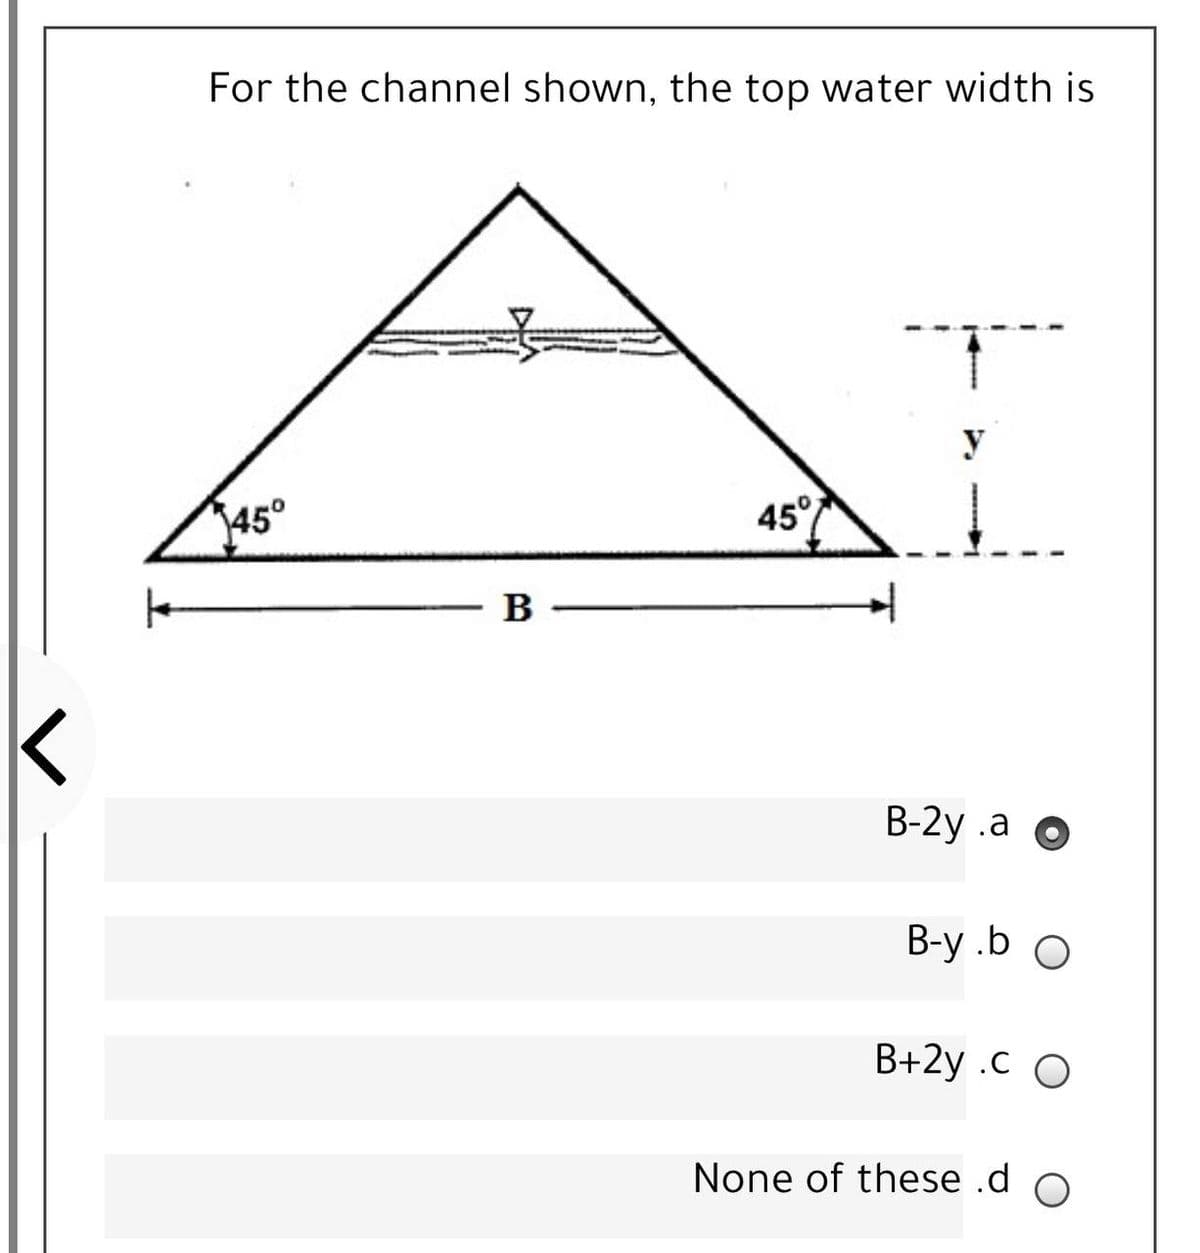 For the channel shown, the top water width is
y
45°
45°
B
B-2y .a O
B-y .b O
B+2y .c O
None of these .d o
